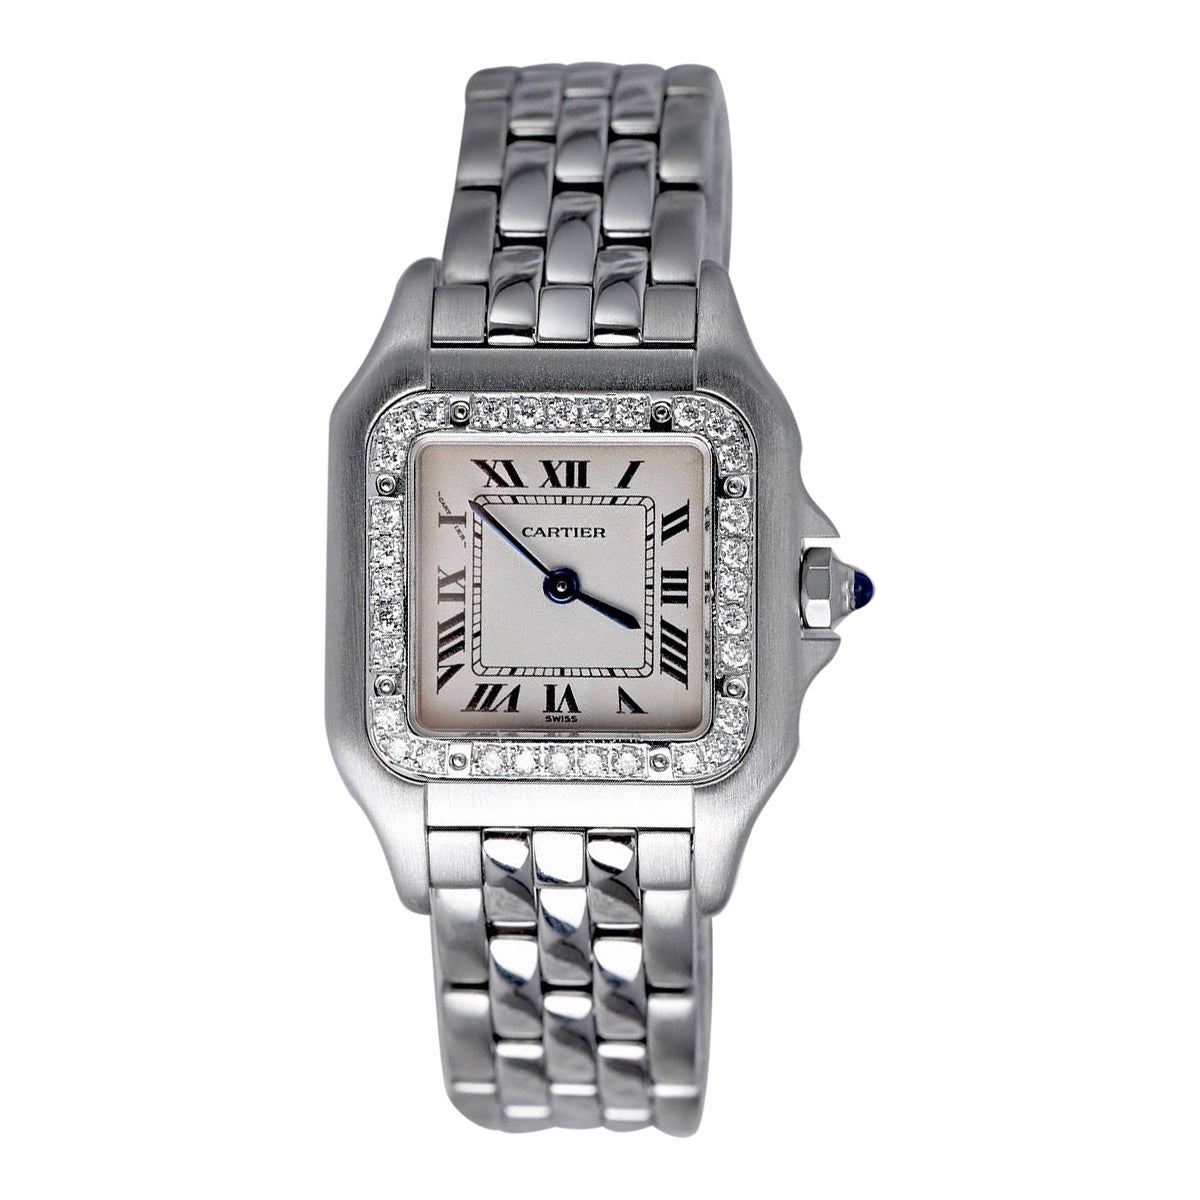 Cartier Panthère Ladies Stainless Steel Watch with Diamond Bezel 1320 For Sale